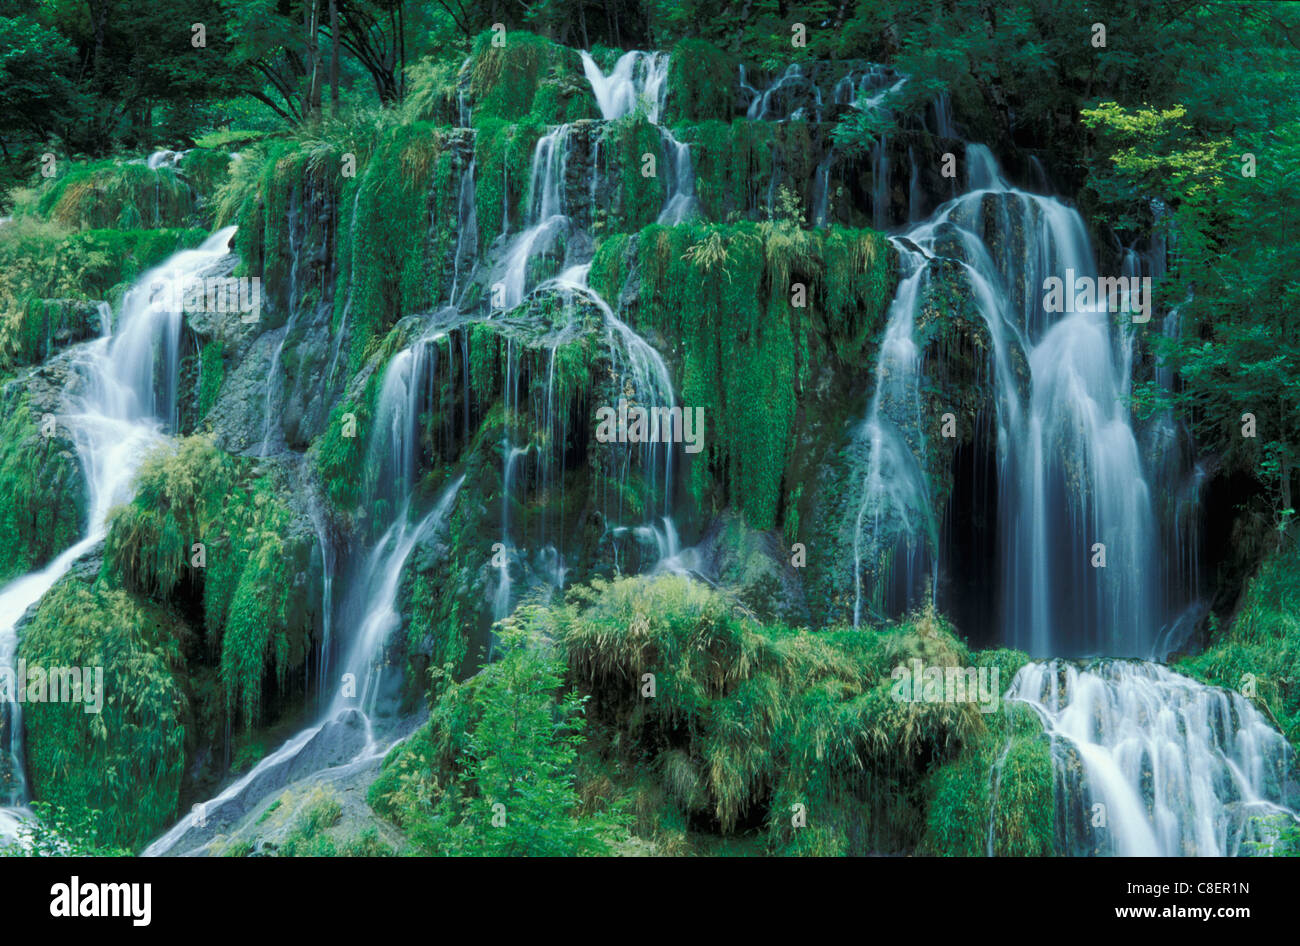 Waterfall, Baume Les Messieurs, Franche-Comte, France, Europe, water, nature Stock Photo